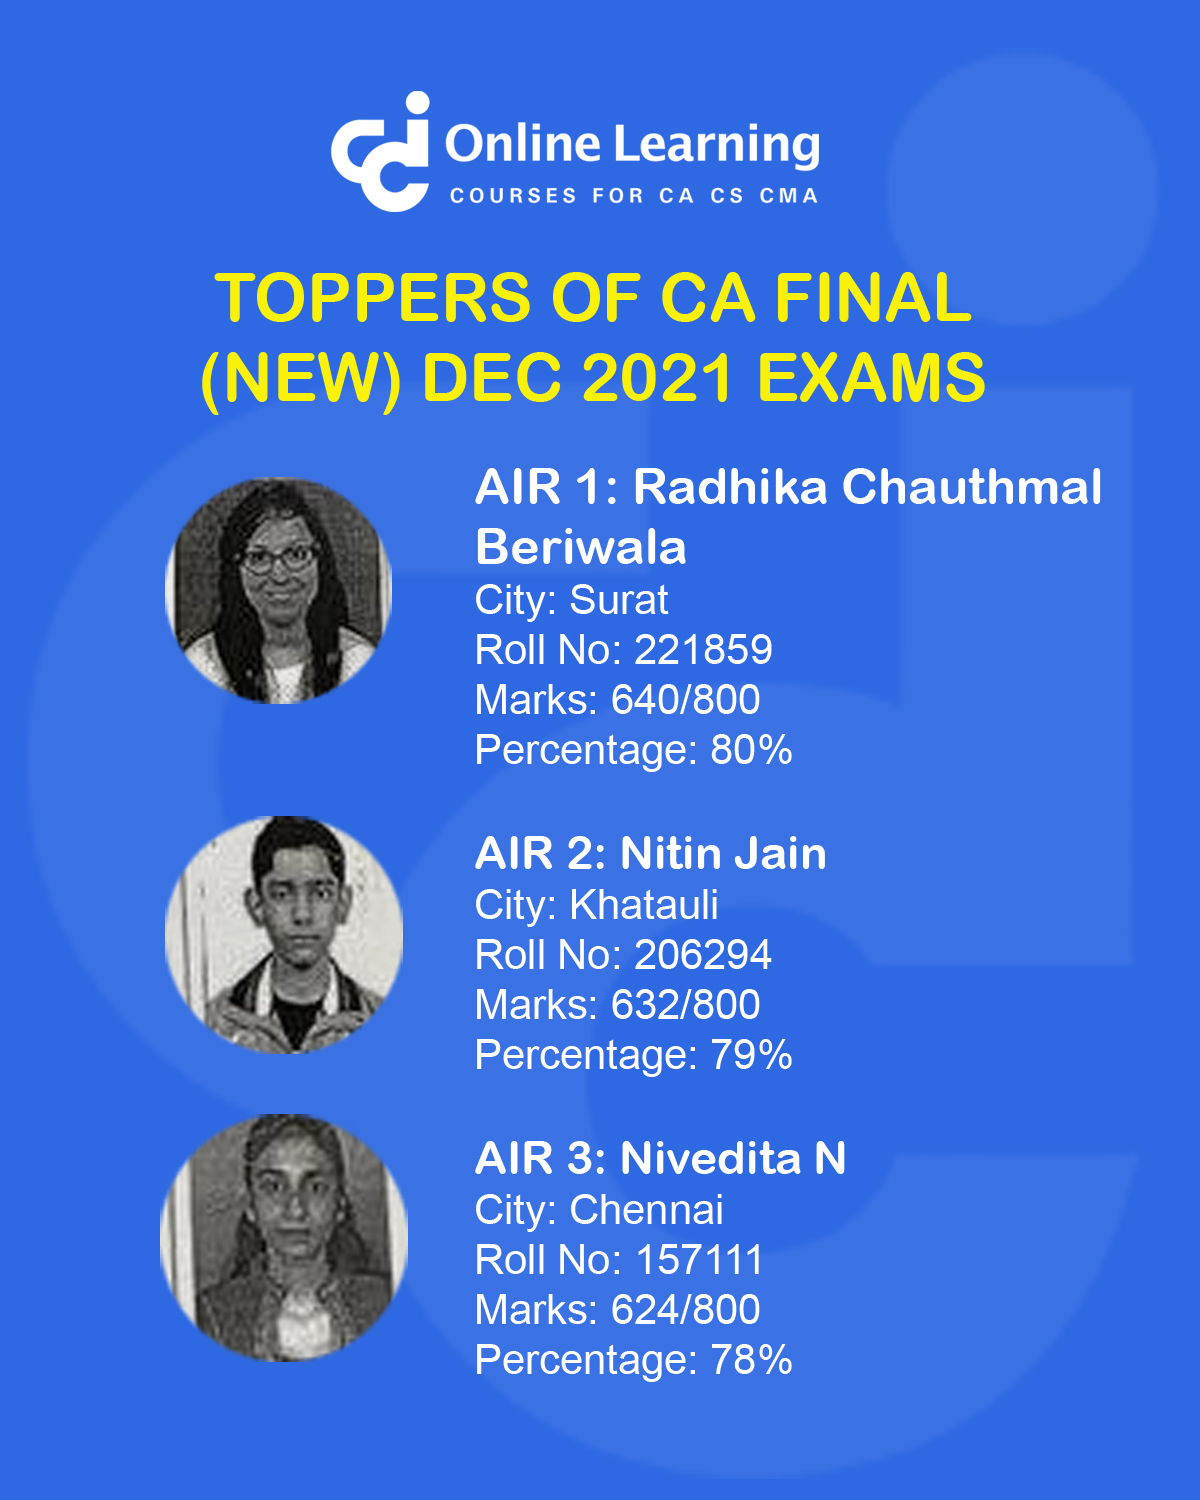 Toppers of CA Final (New Scheme) Examination held in Dec 2021 Exams